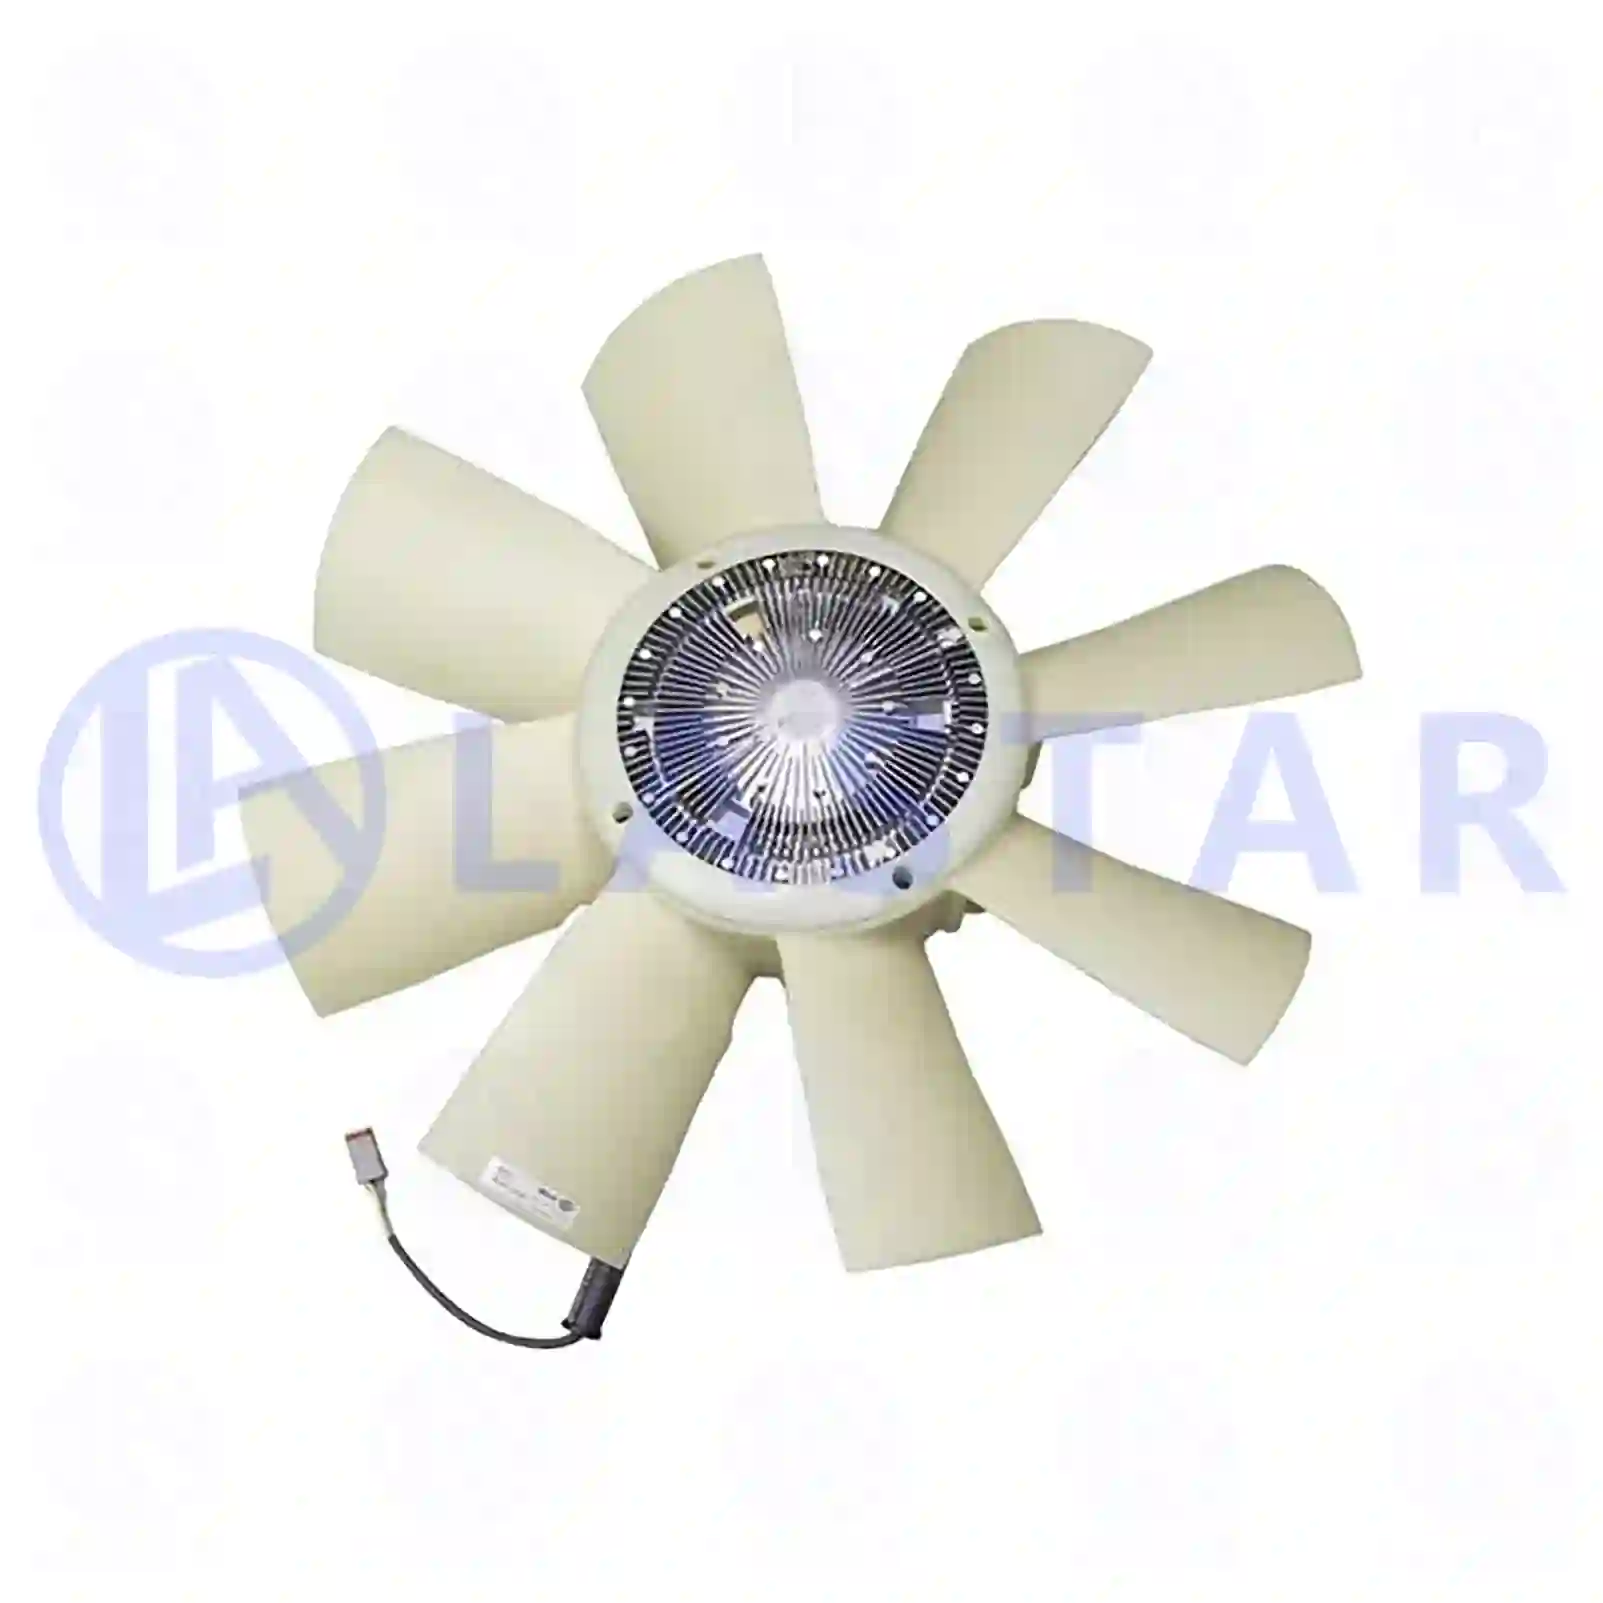 Fan with clutch, 77709782, 1453967, 1856995, 2052003, 2132266, 2386724, 2410086, ZG00392-0008 ||  77709782 Lastar Spare Part | Truck Spare Parts, Auotomotive Spare Parts Fan with clutch, 77709782, 1453967, 1856995, 2052003, 2132266, 2386724, 2410086, ZG00392-0008 ||  77709782 Lastar Spare Part | Truck Spare Parts, Auotomotive Spare Parts